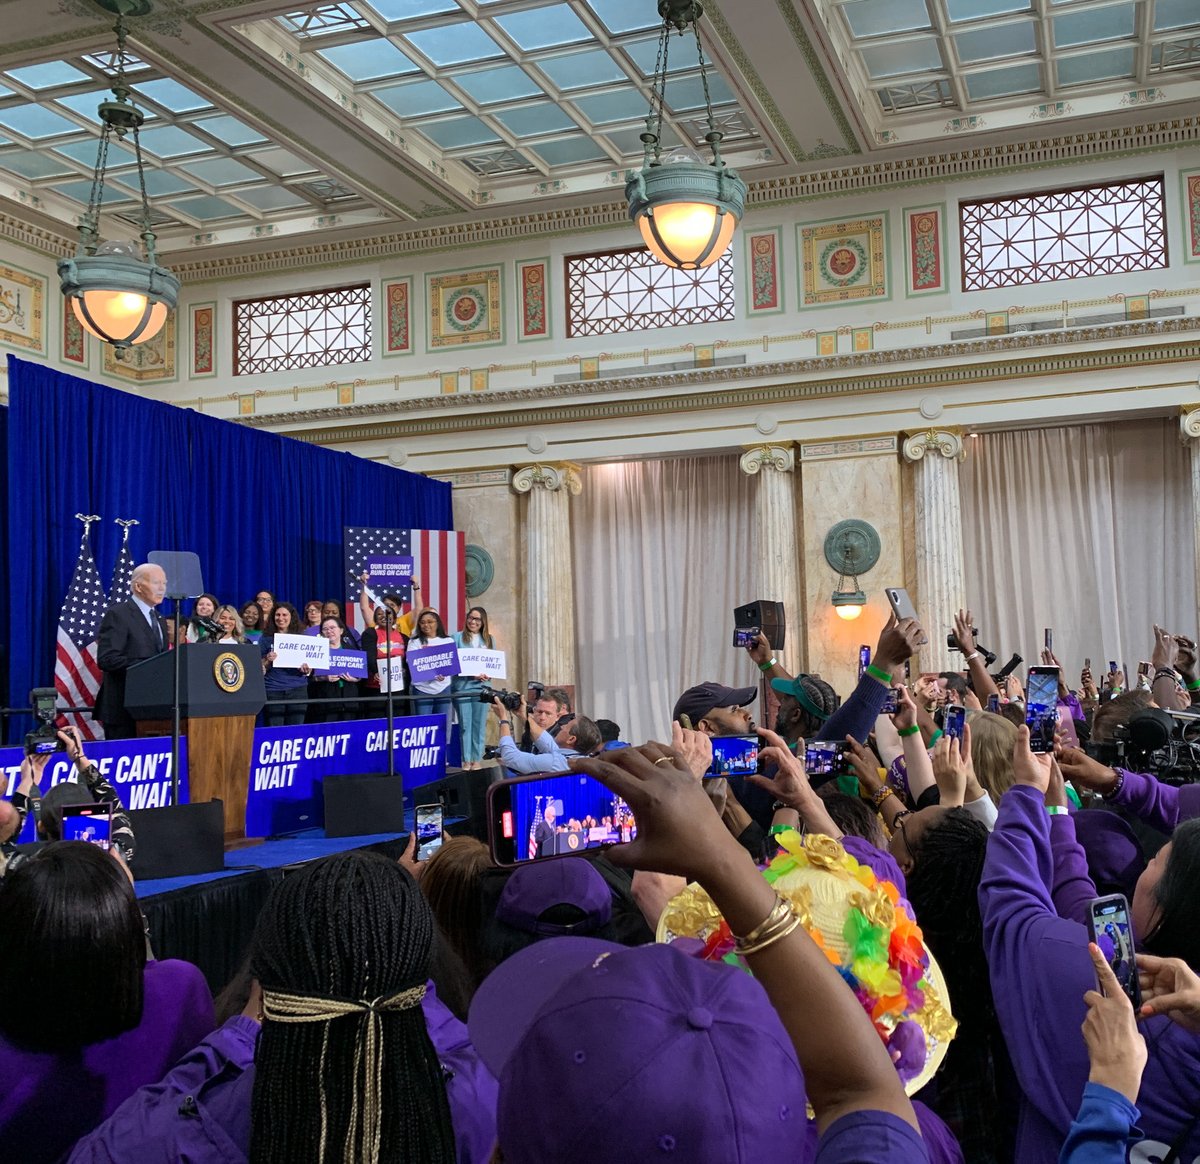 “Care workers represent the best of America” @POTUS